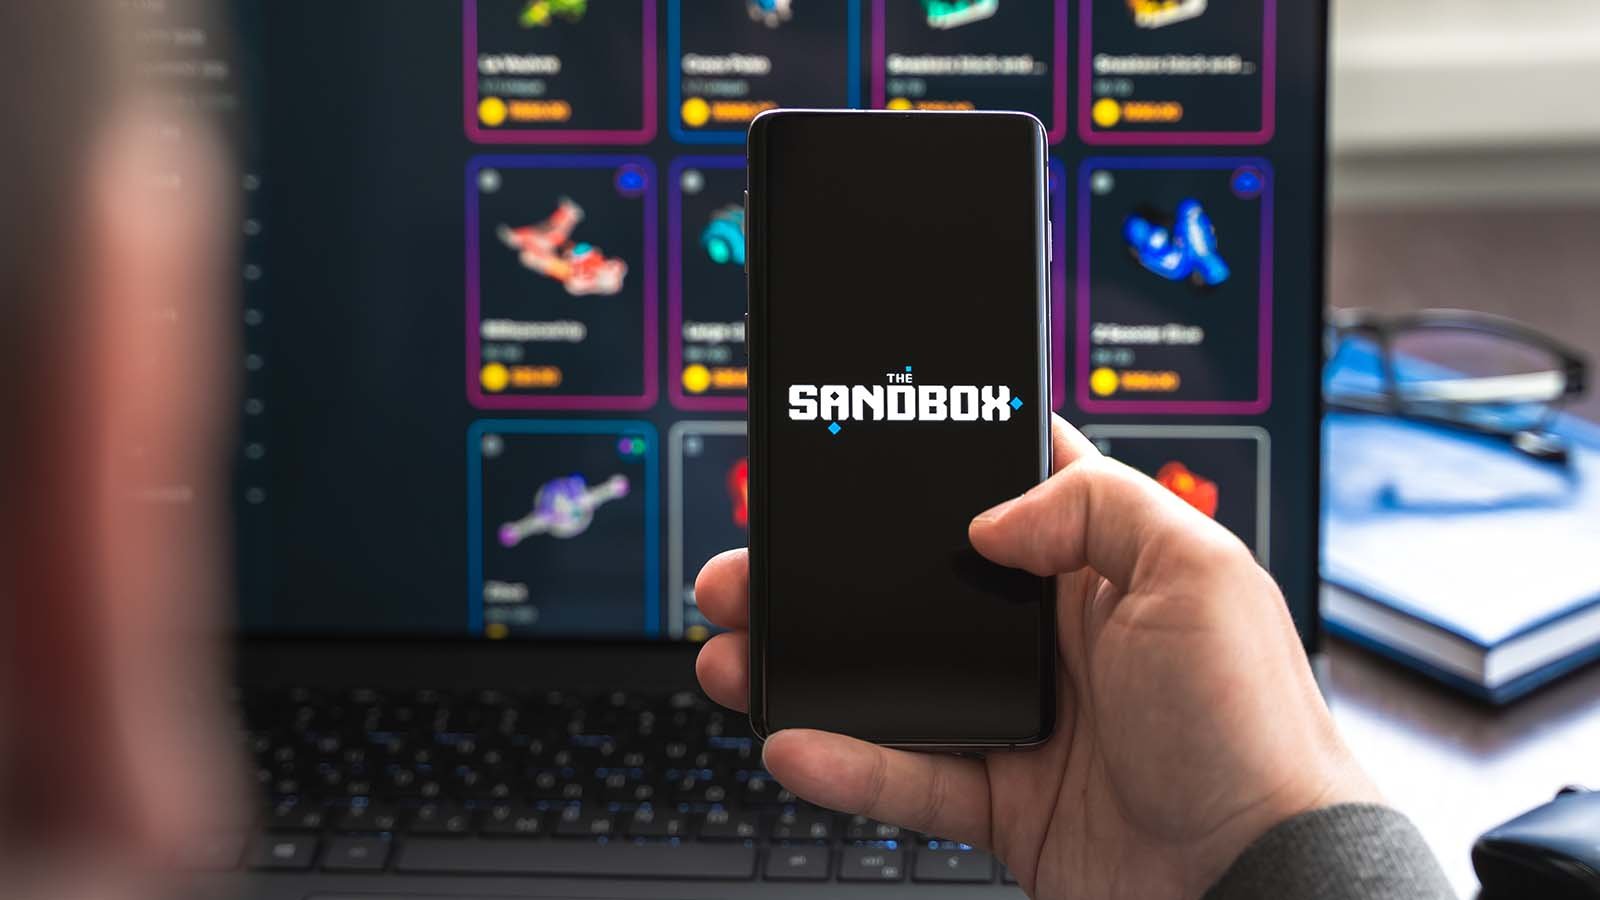 The logo for The Sandbox (SAND) on a mobile phone.